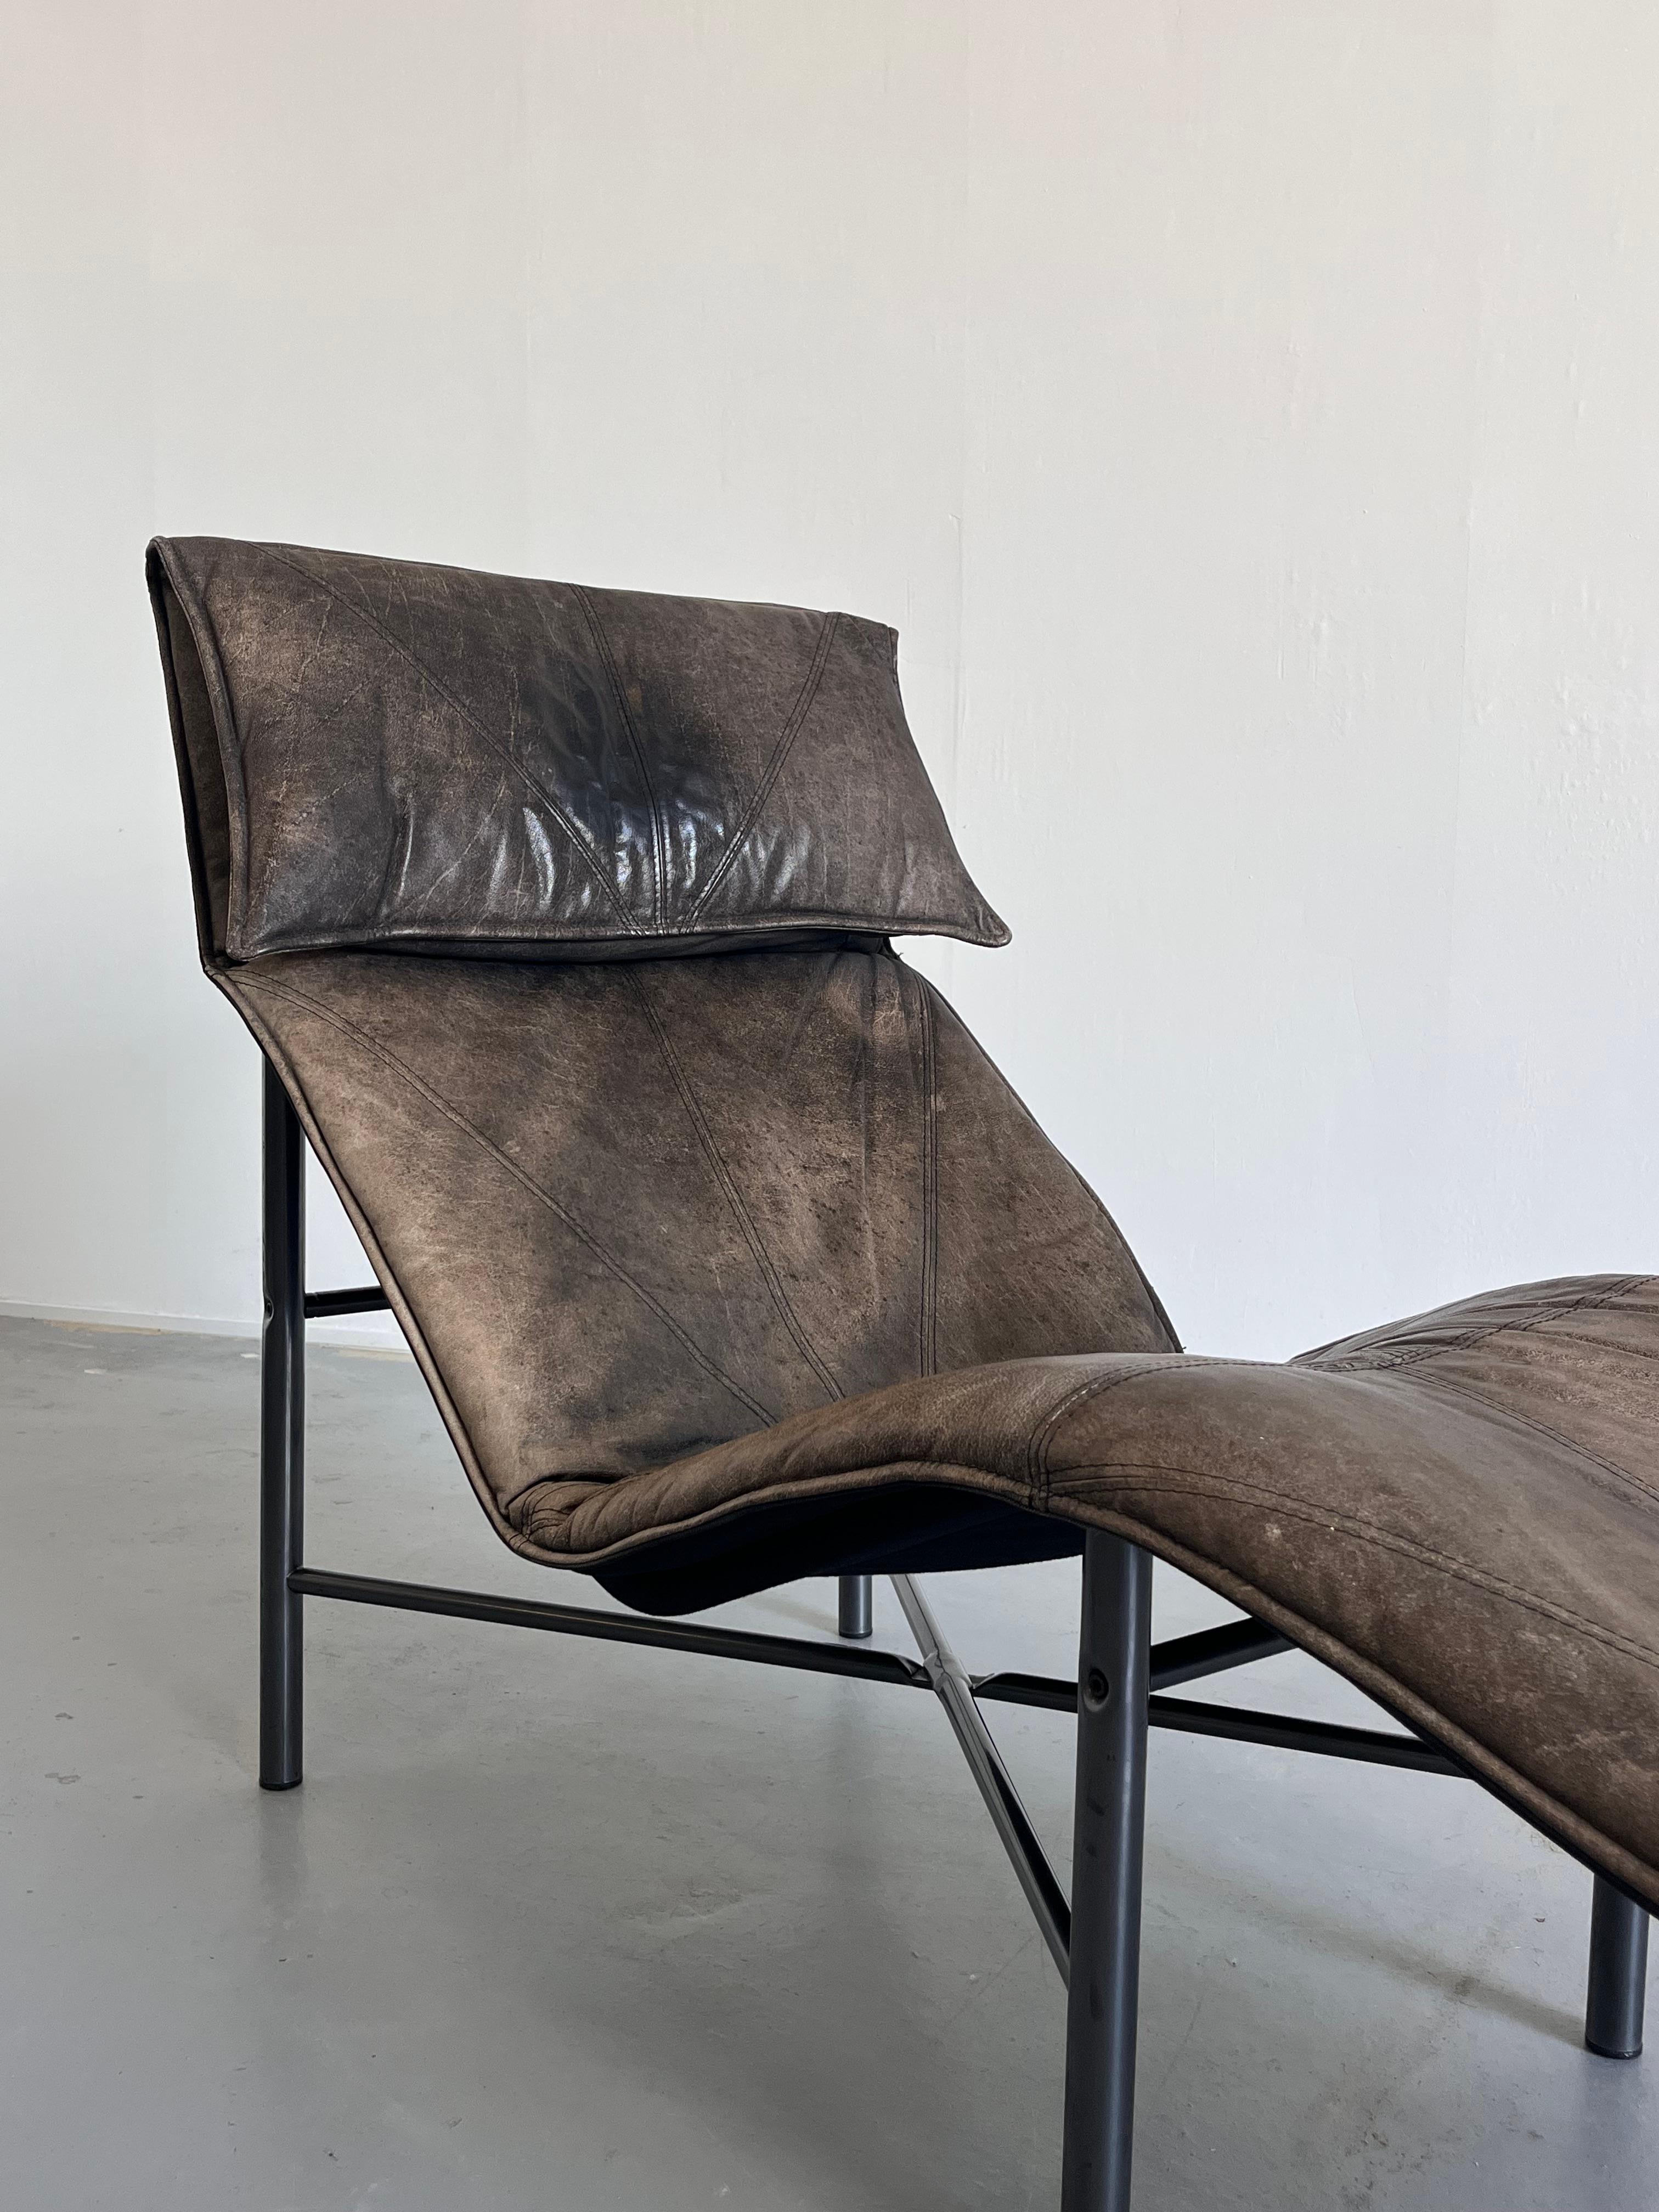 Swedish Vintage Leather Chaise Longue by Tord Bjorklund for Ikea, Sweden, 1980s